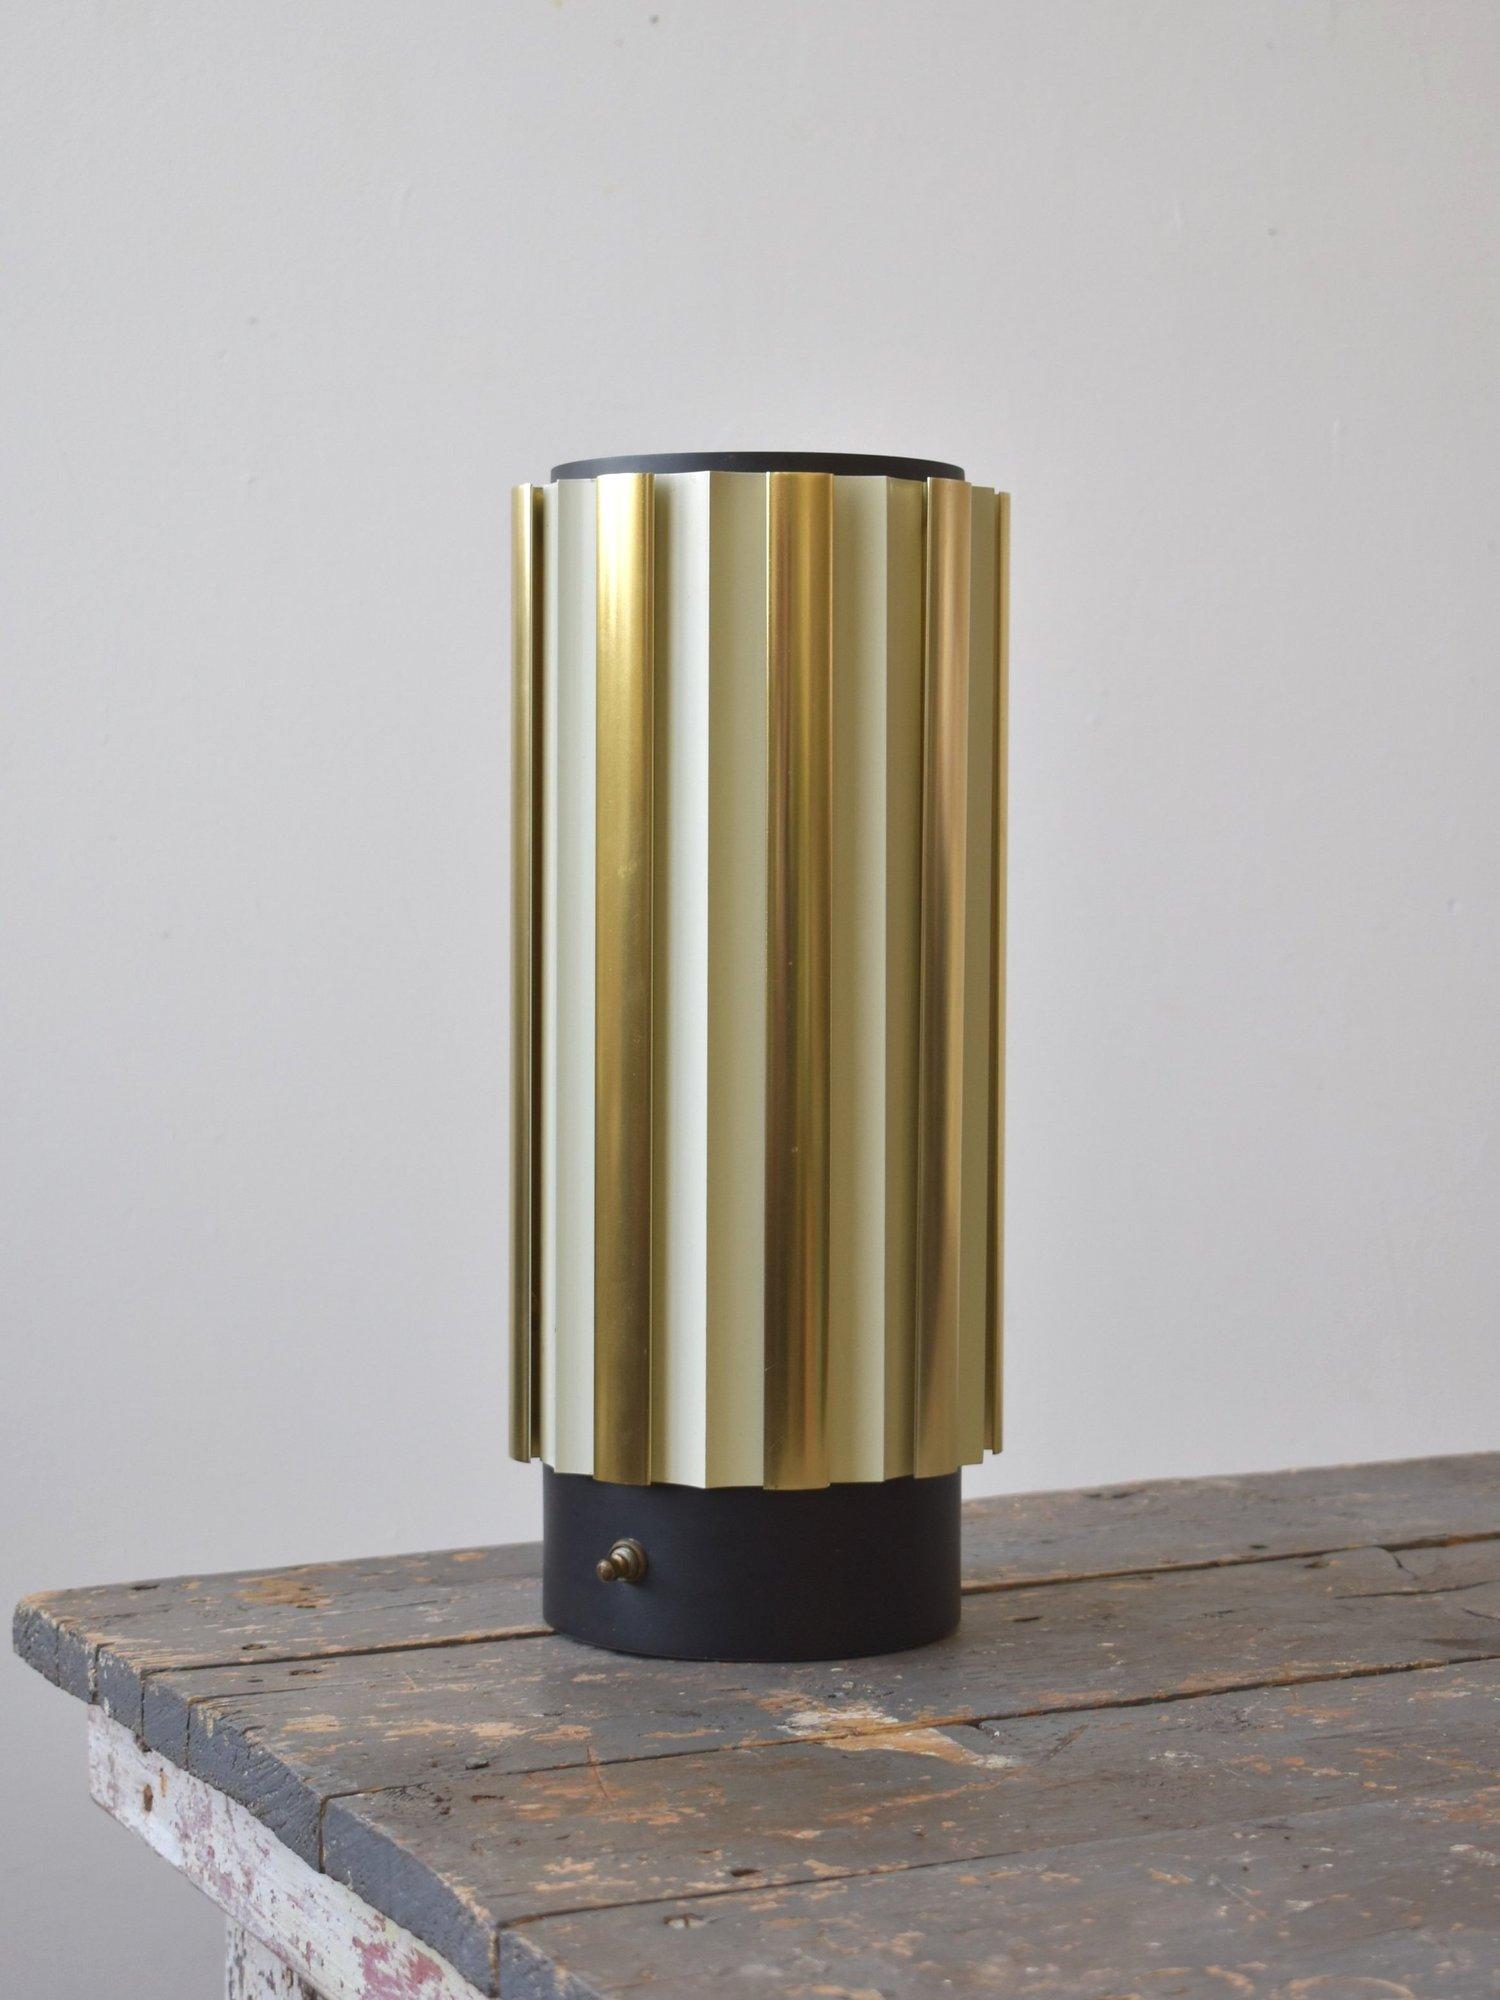 Vintage Louvered Metal Lantern Lamp Attributed to Gerald Thurston for Lightolier, Circa 1960s. Cylindrical body with louvered aluminum fins alternating between gold-tone and cream, allowing a unique pattern of warm light to emit from the lamp.